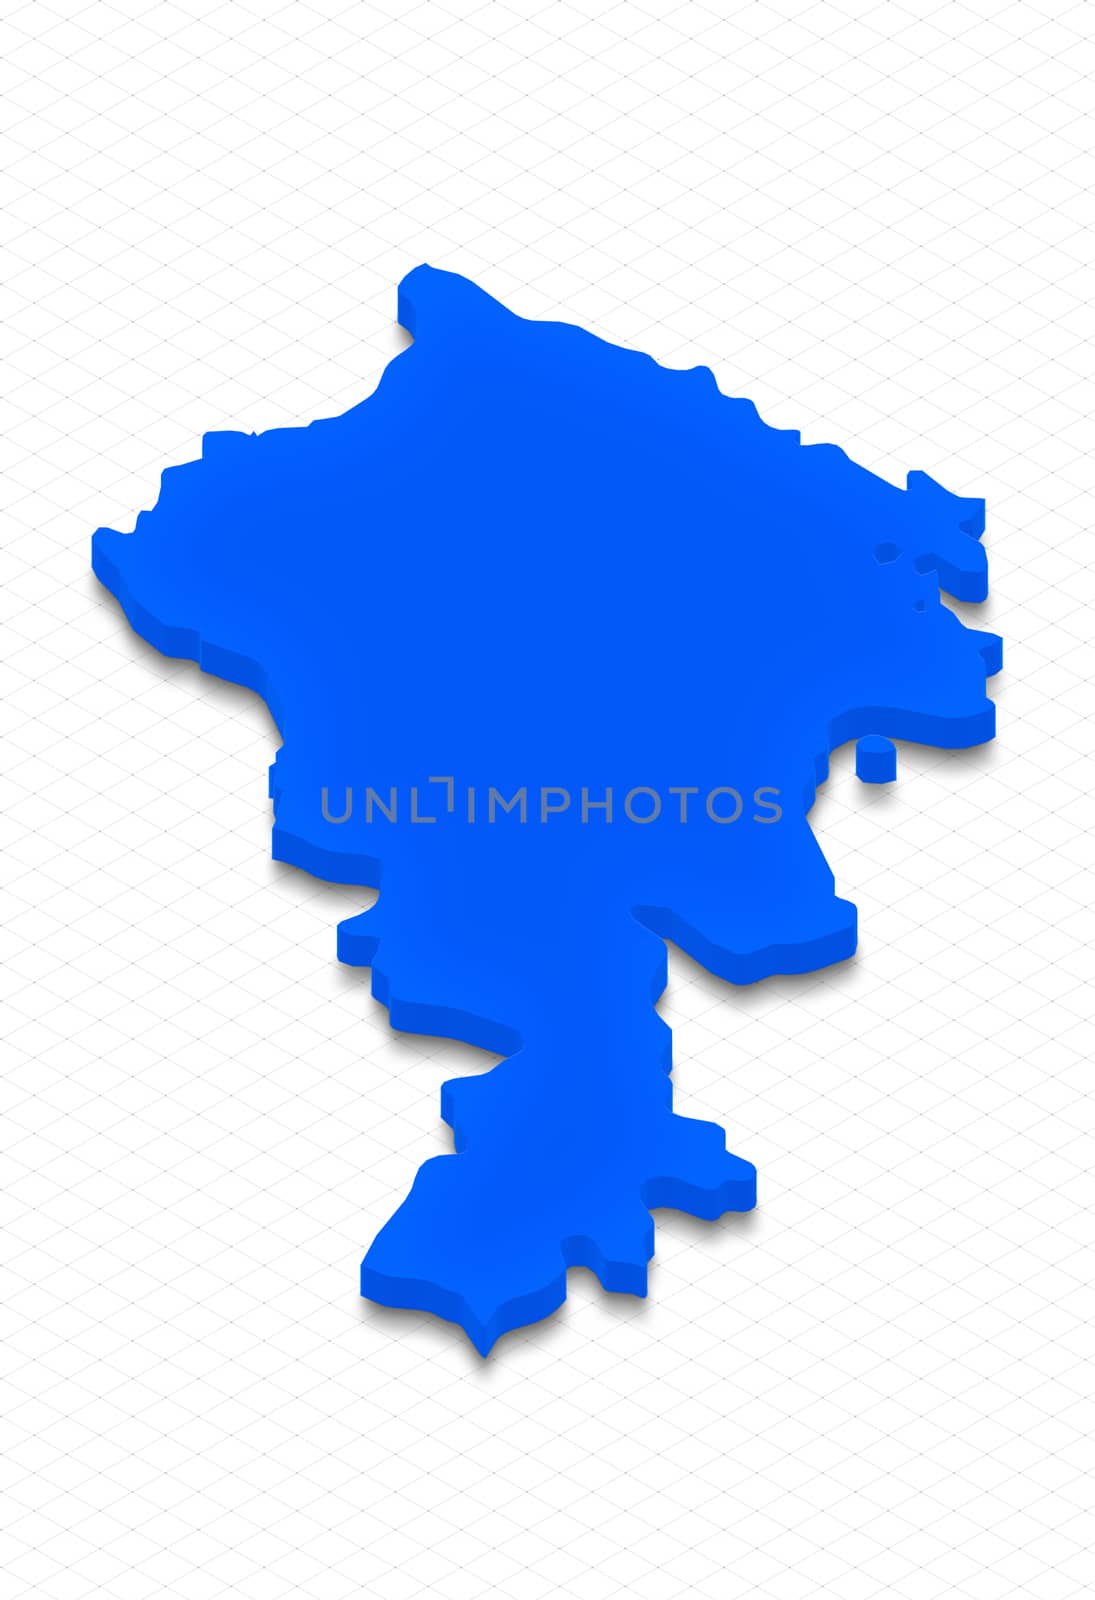 Illustration of a blue ground map of Armenia on grid background. Left 3D isometric perspective projection.